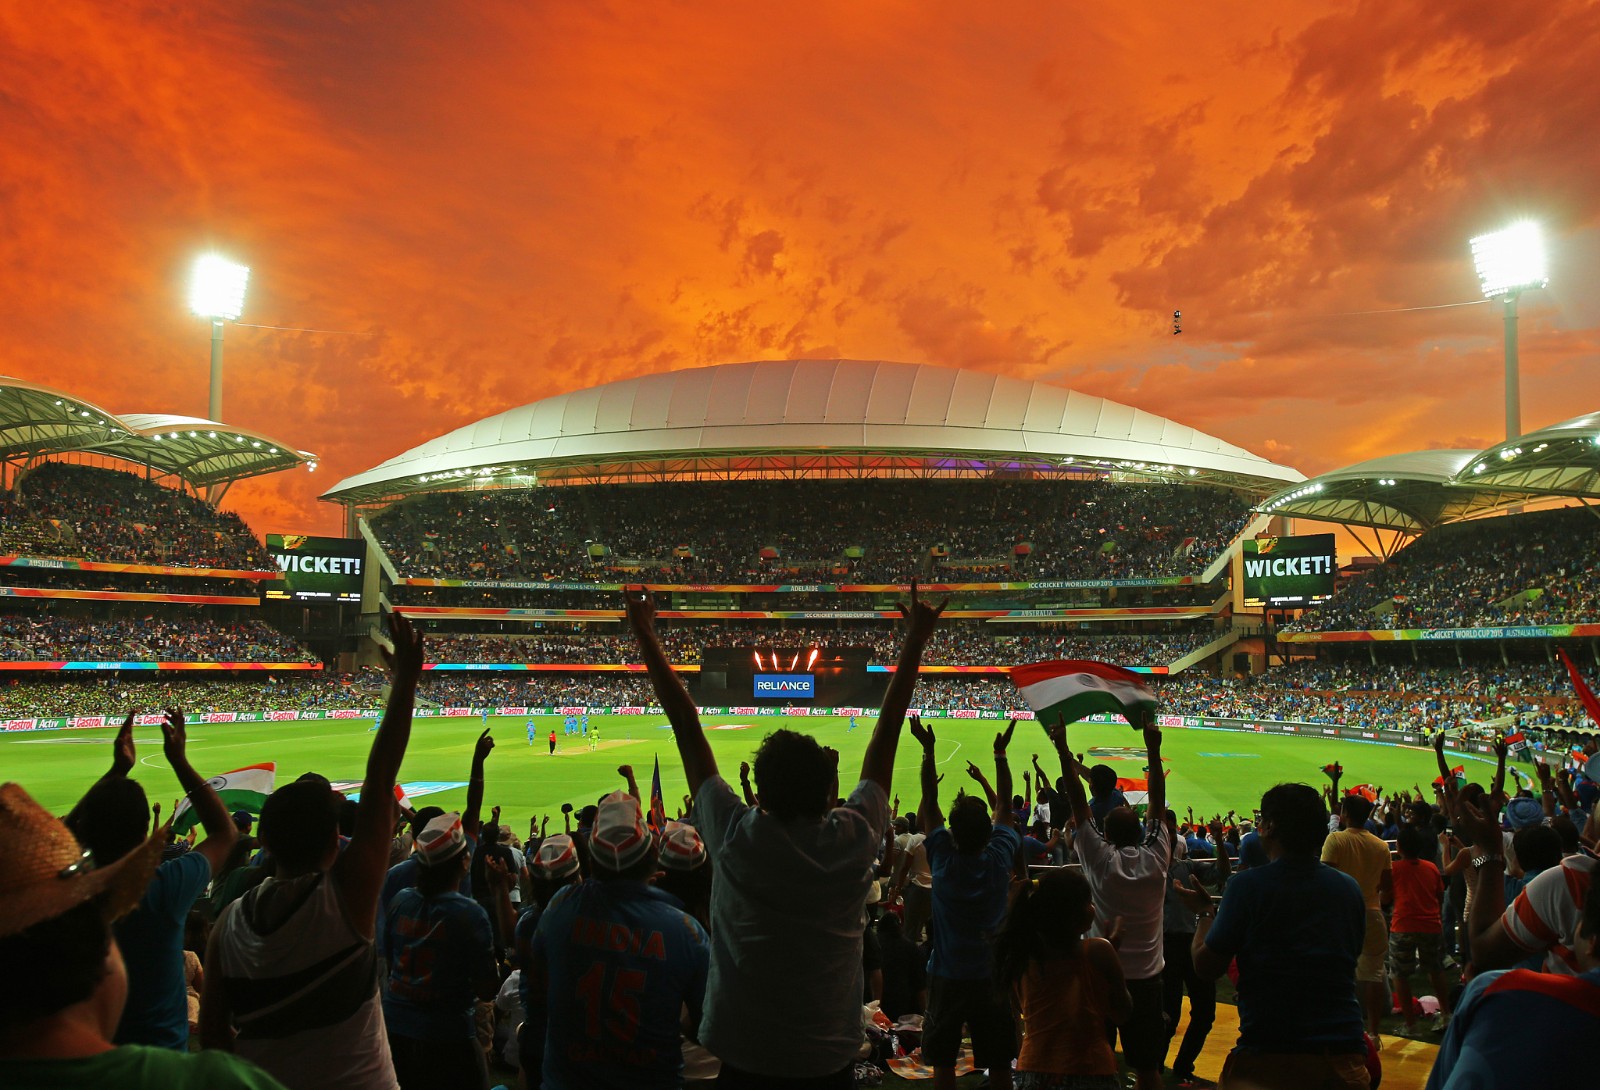 A general view as Indian fans in the crowd celebrate the fall of a Pakistan wicket during the 2015 ICC Cricket World Cup match between India and Pakistan at Adelaide Oval on February 15, 2015 in Adelaide, Australia. /CFP